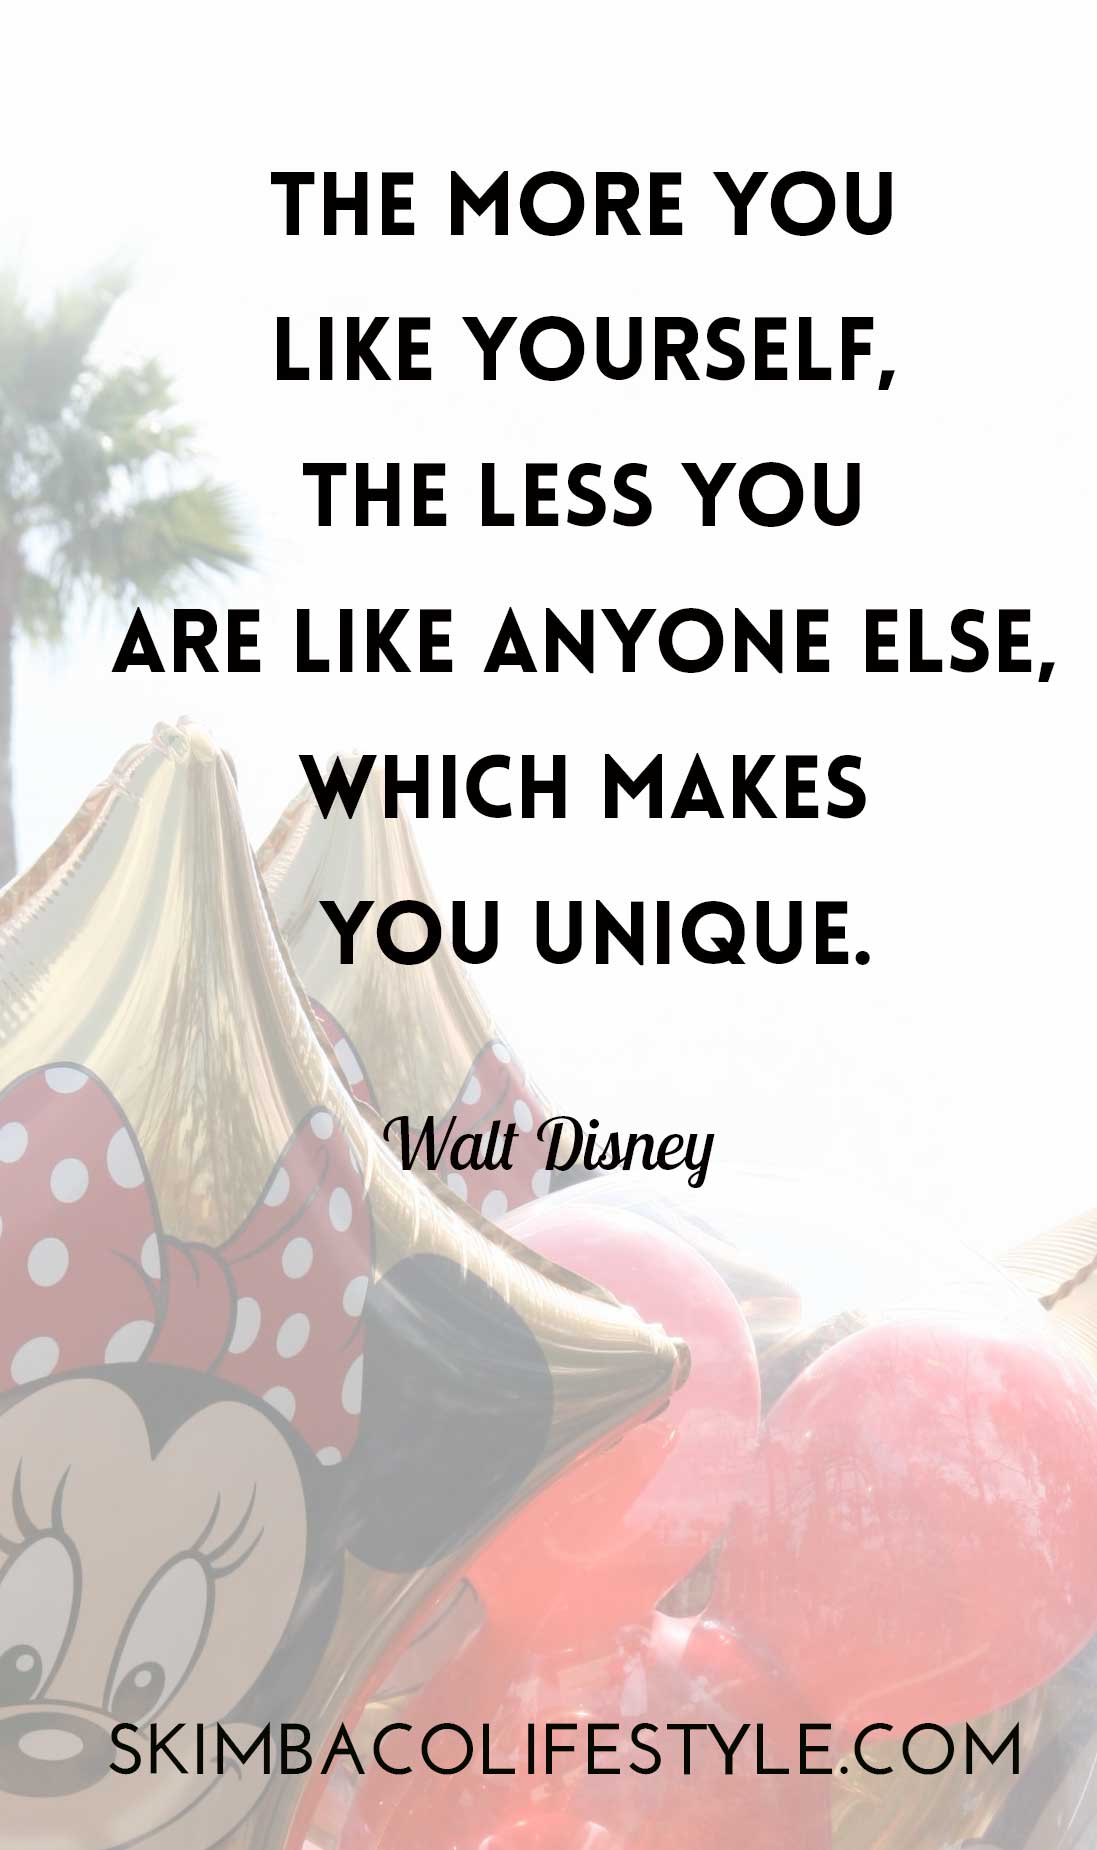 disney-quotes-for-business-owners